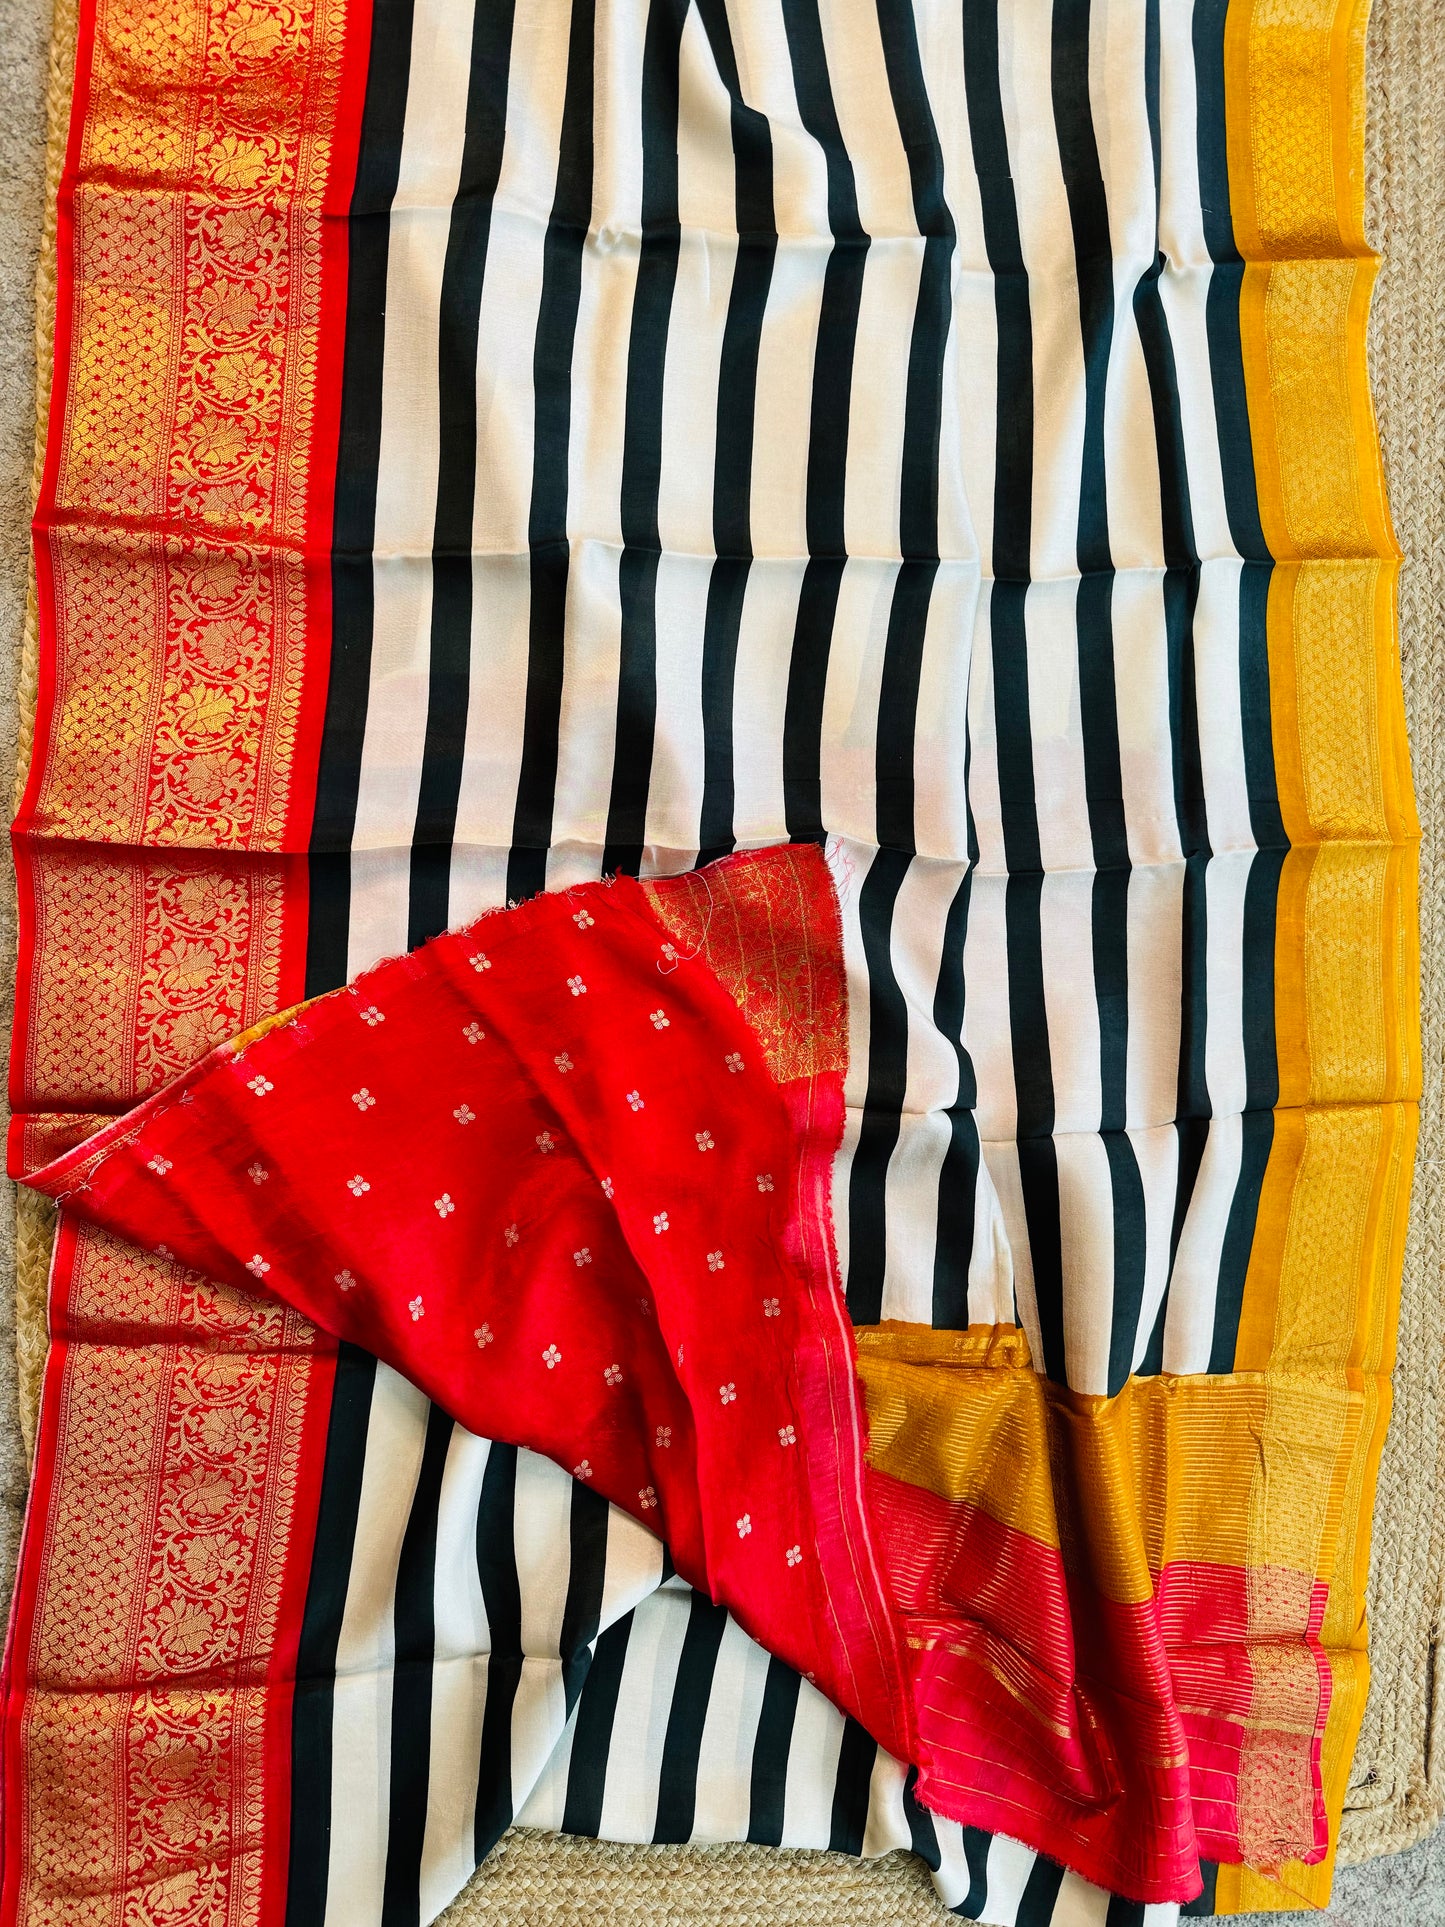 STRIPES AND COLORS - RED